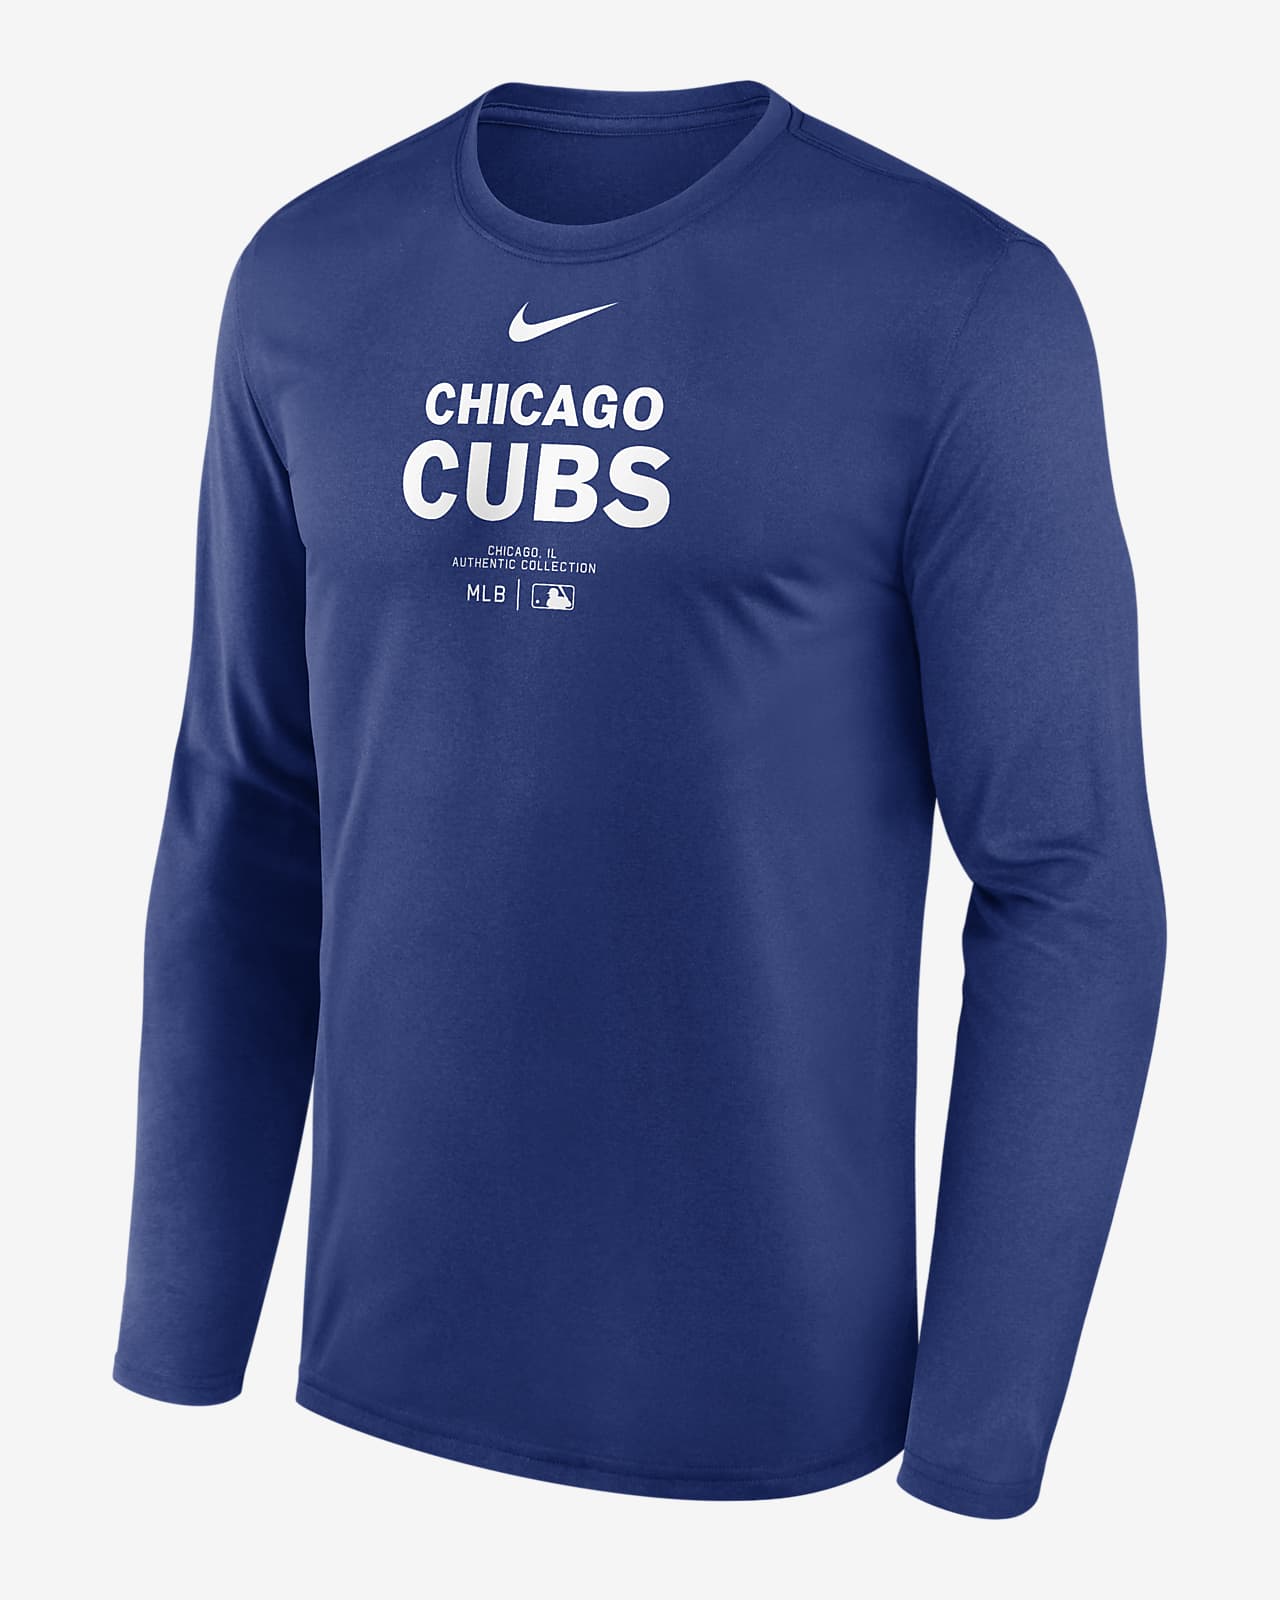 Chicago Cubs Authentic Collection Practice Men's Nike Dri-FIT MLB Long-Sleeve T-Shirt